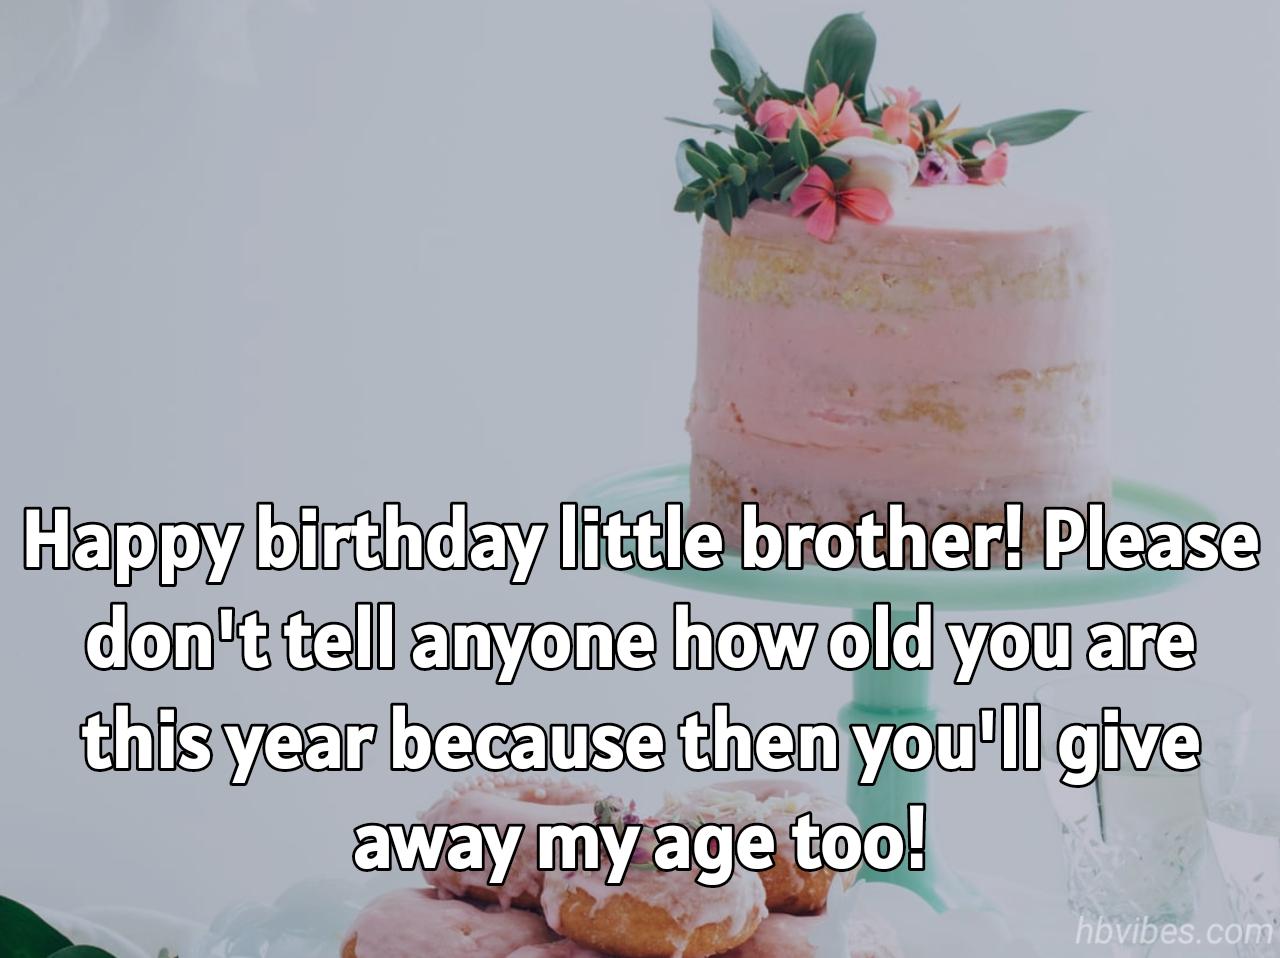 101+ Funny Birthday Wishes for Younger Brother » HBVibes